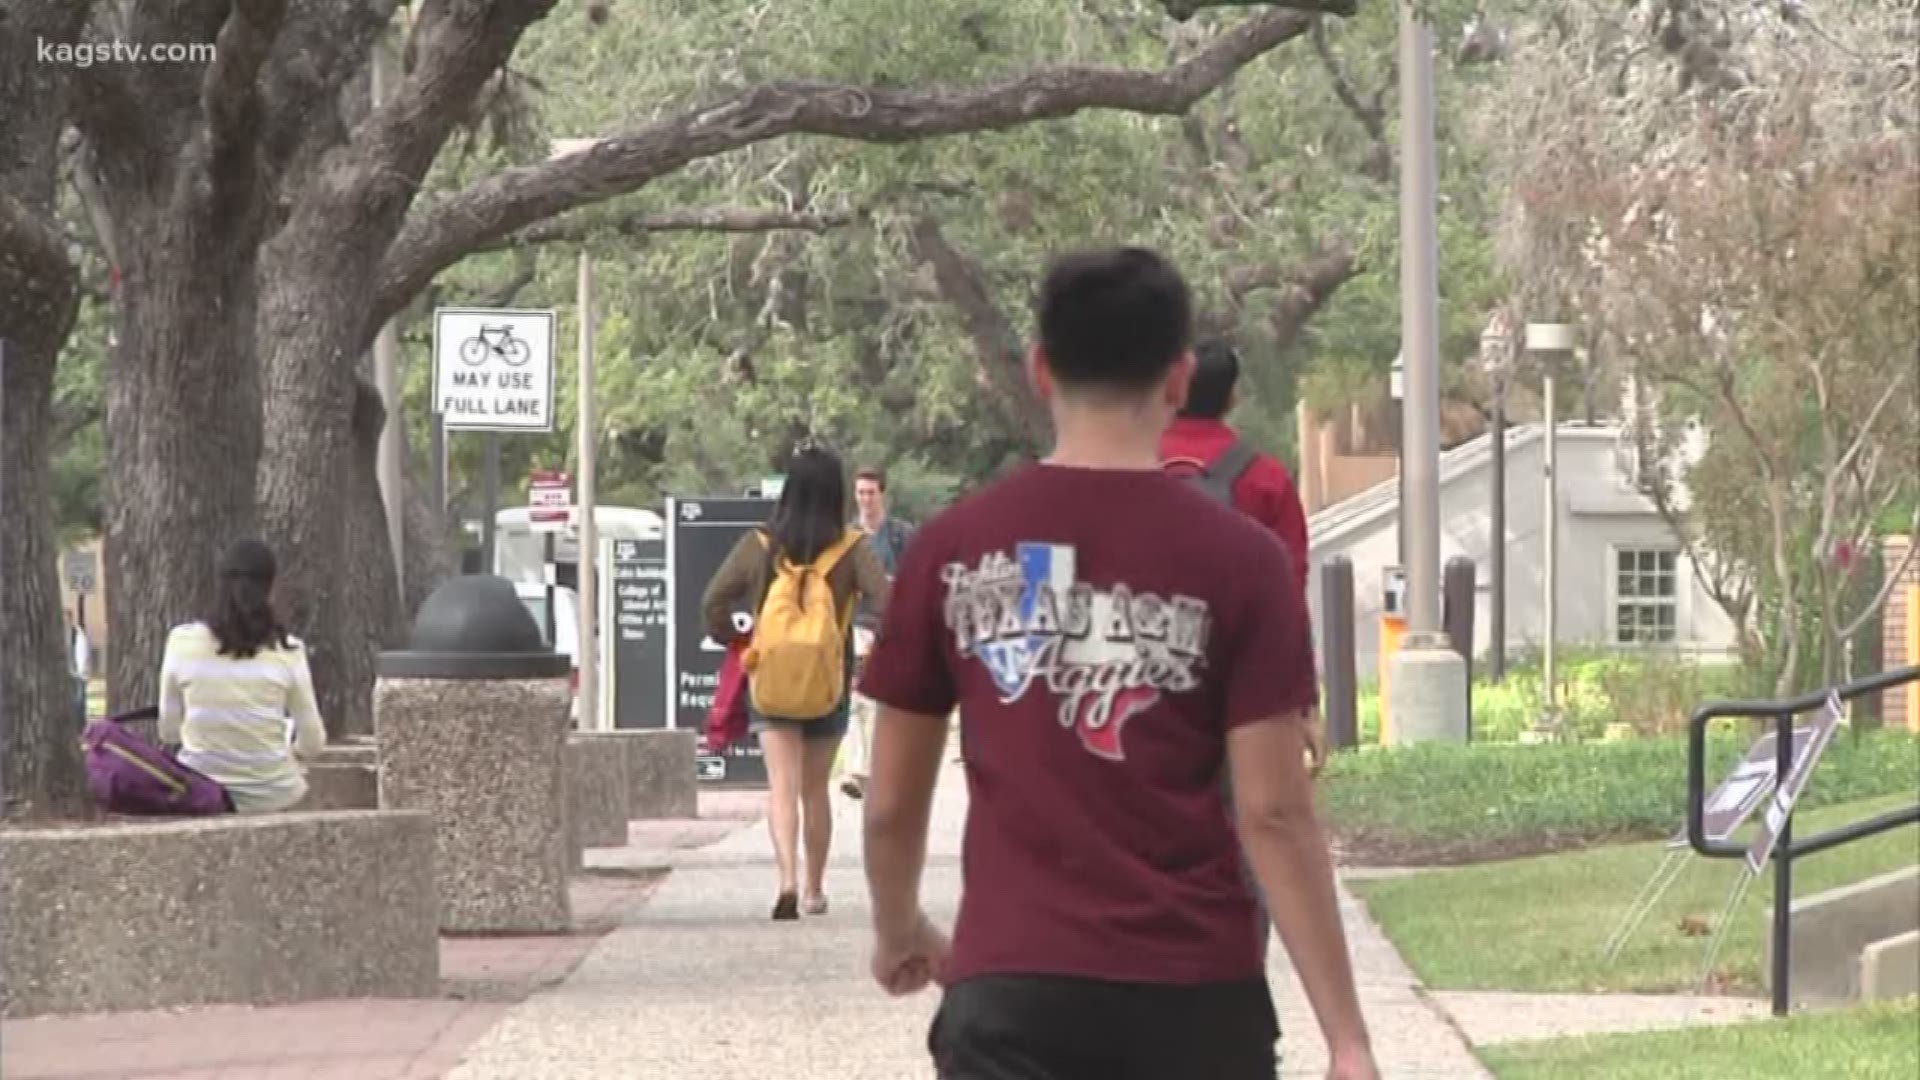 Texas A&M is the first university in the state to earn the highest rating for free speech from the foundation for Individual Rights in Education.